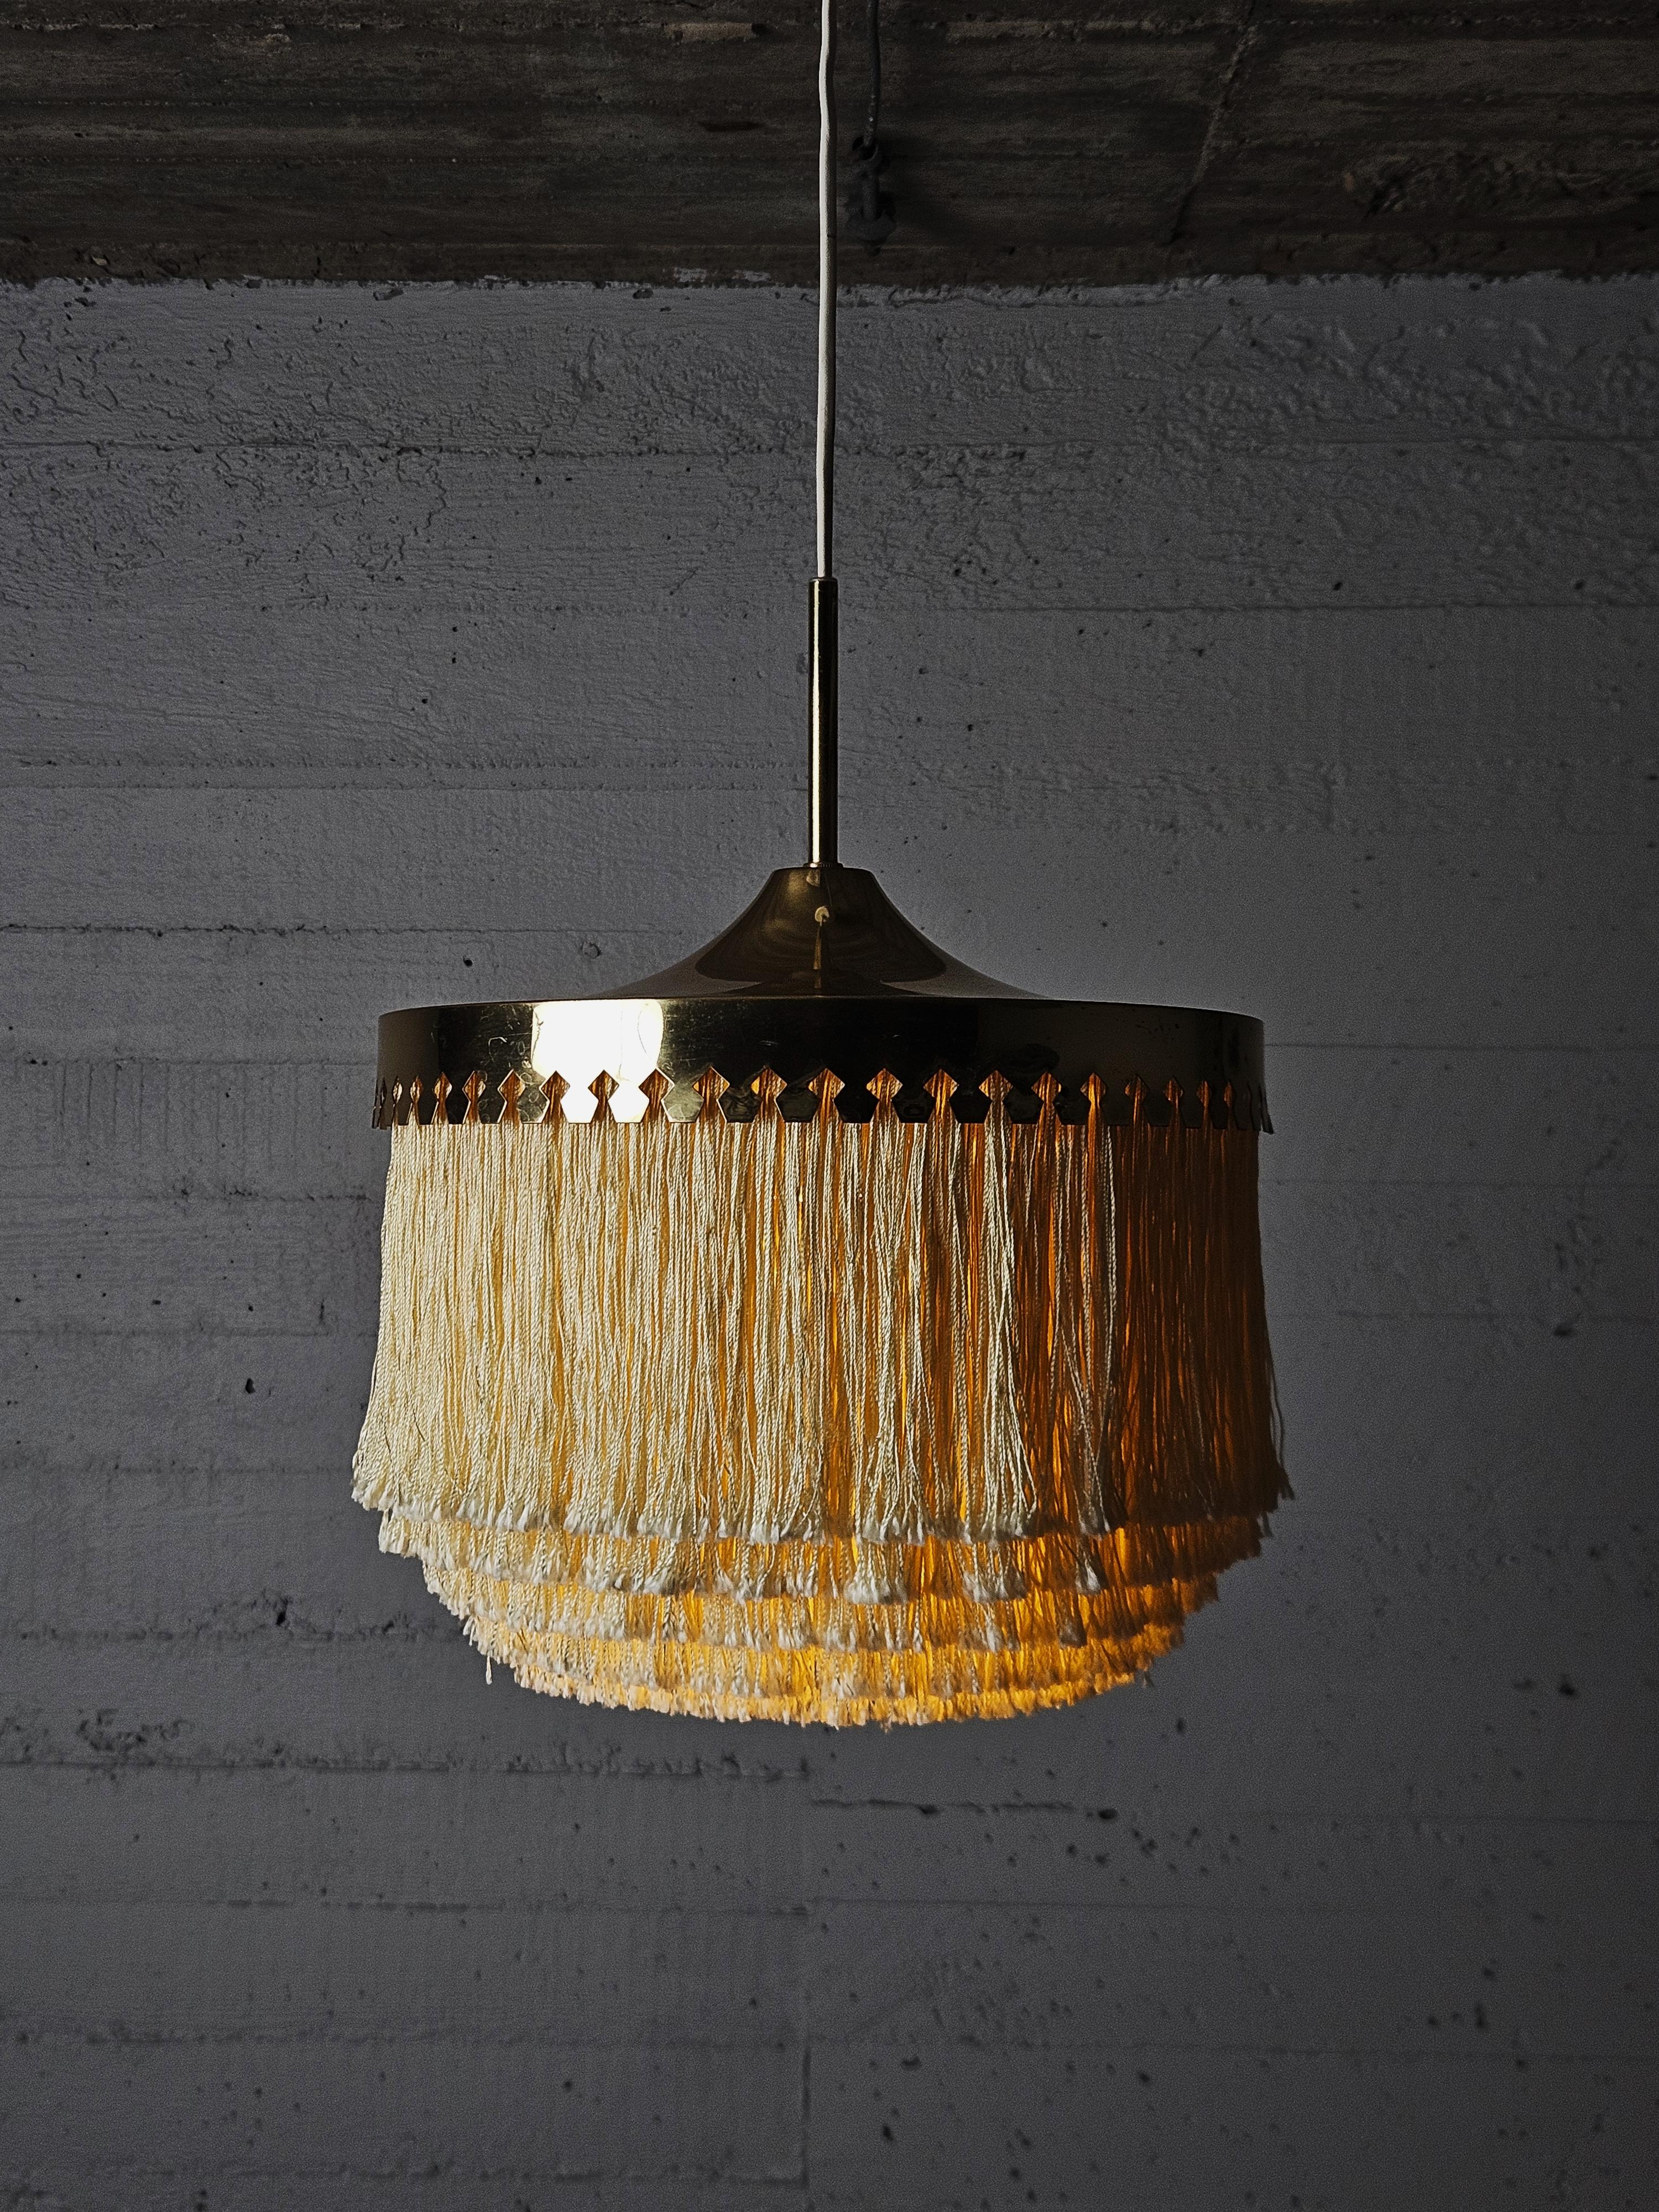 Elegant ceiling lamp model 'T601/M' designed by Hans-Agne Jakobsson for his own firm AB Markaryd, Sweden, during the 1960s. 

Champagne colored silk fringes hanging from the brass frame. 